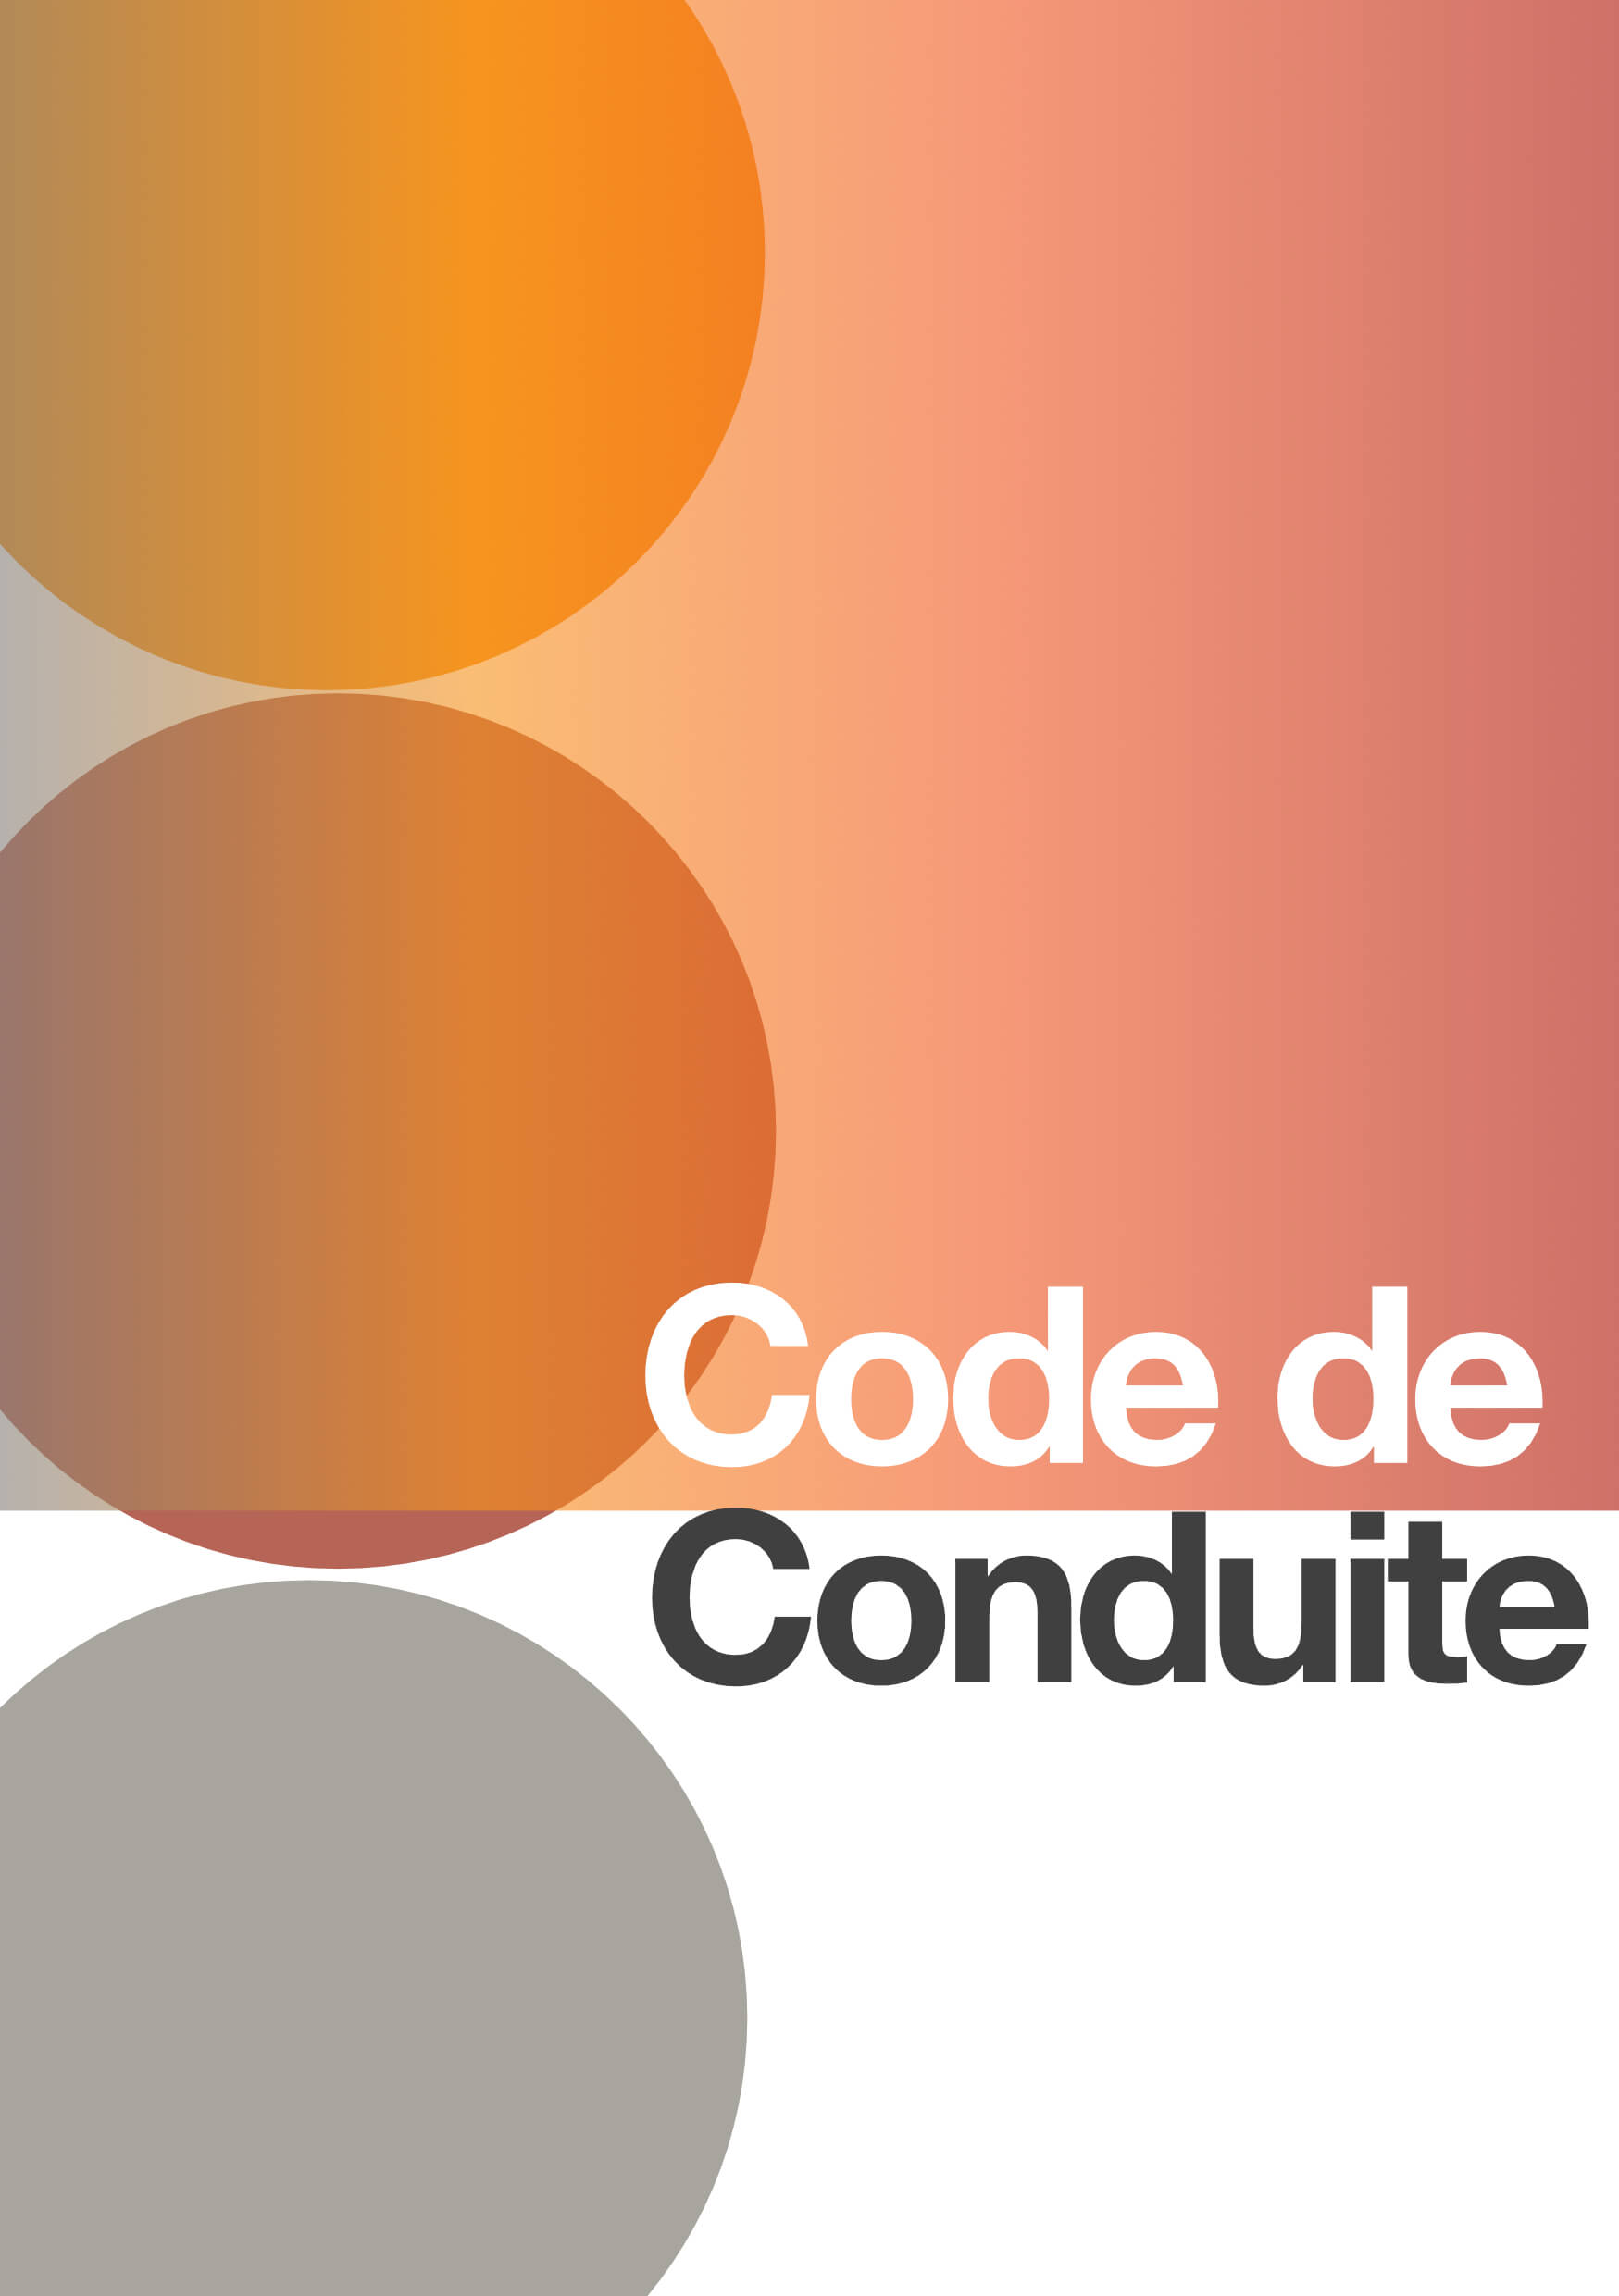 Online conference code of conduct